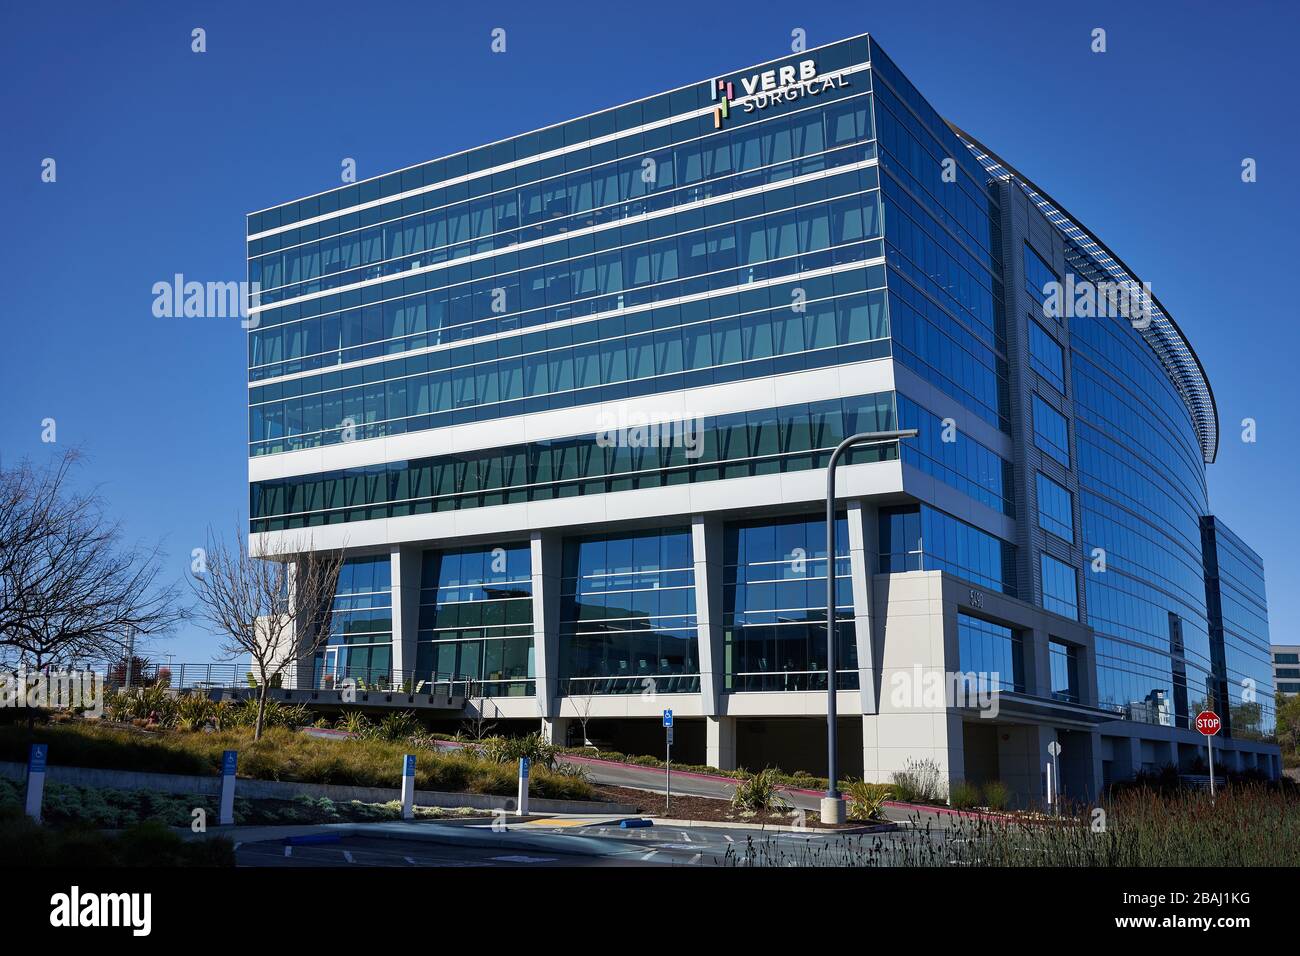 American robotic surgery and data science company Verb Surgical, Inc.'s Headquarters in Santa Clara, California. Verb is owned by Johnson & Johnson. Stock Photo